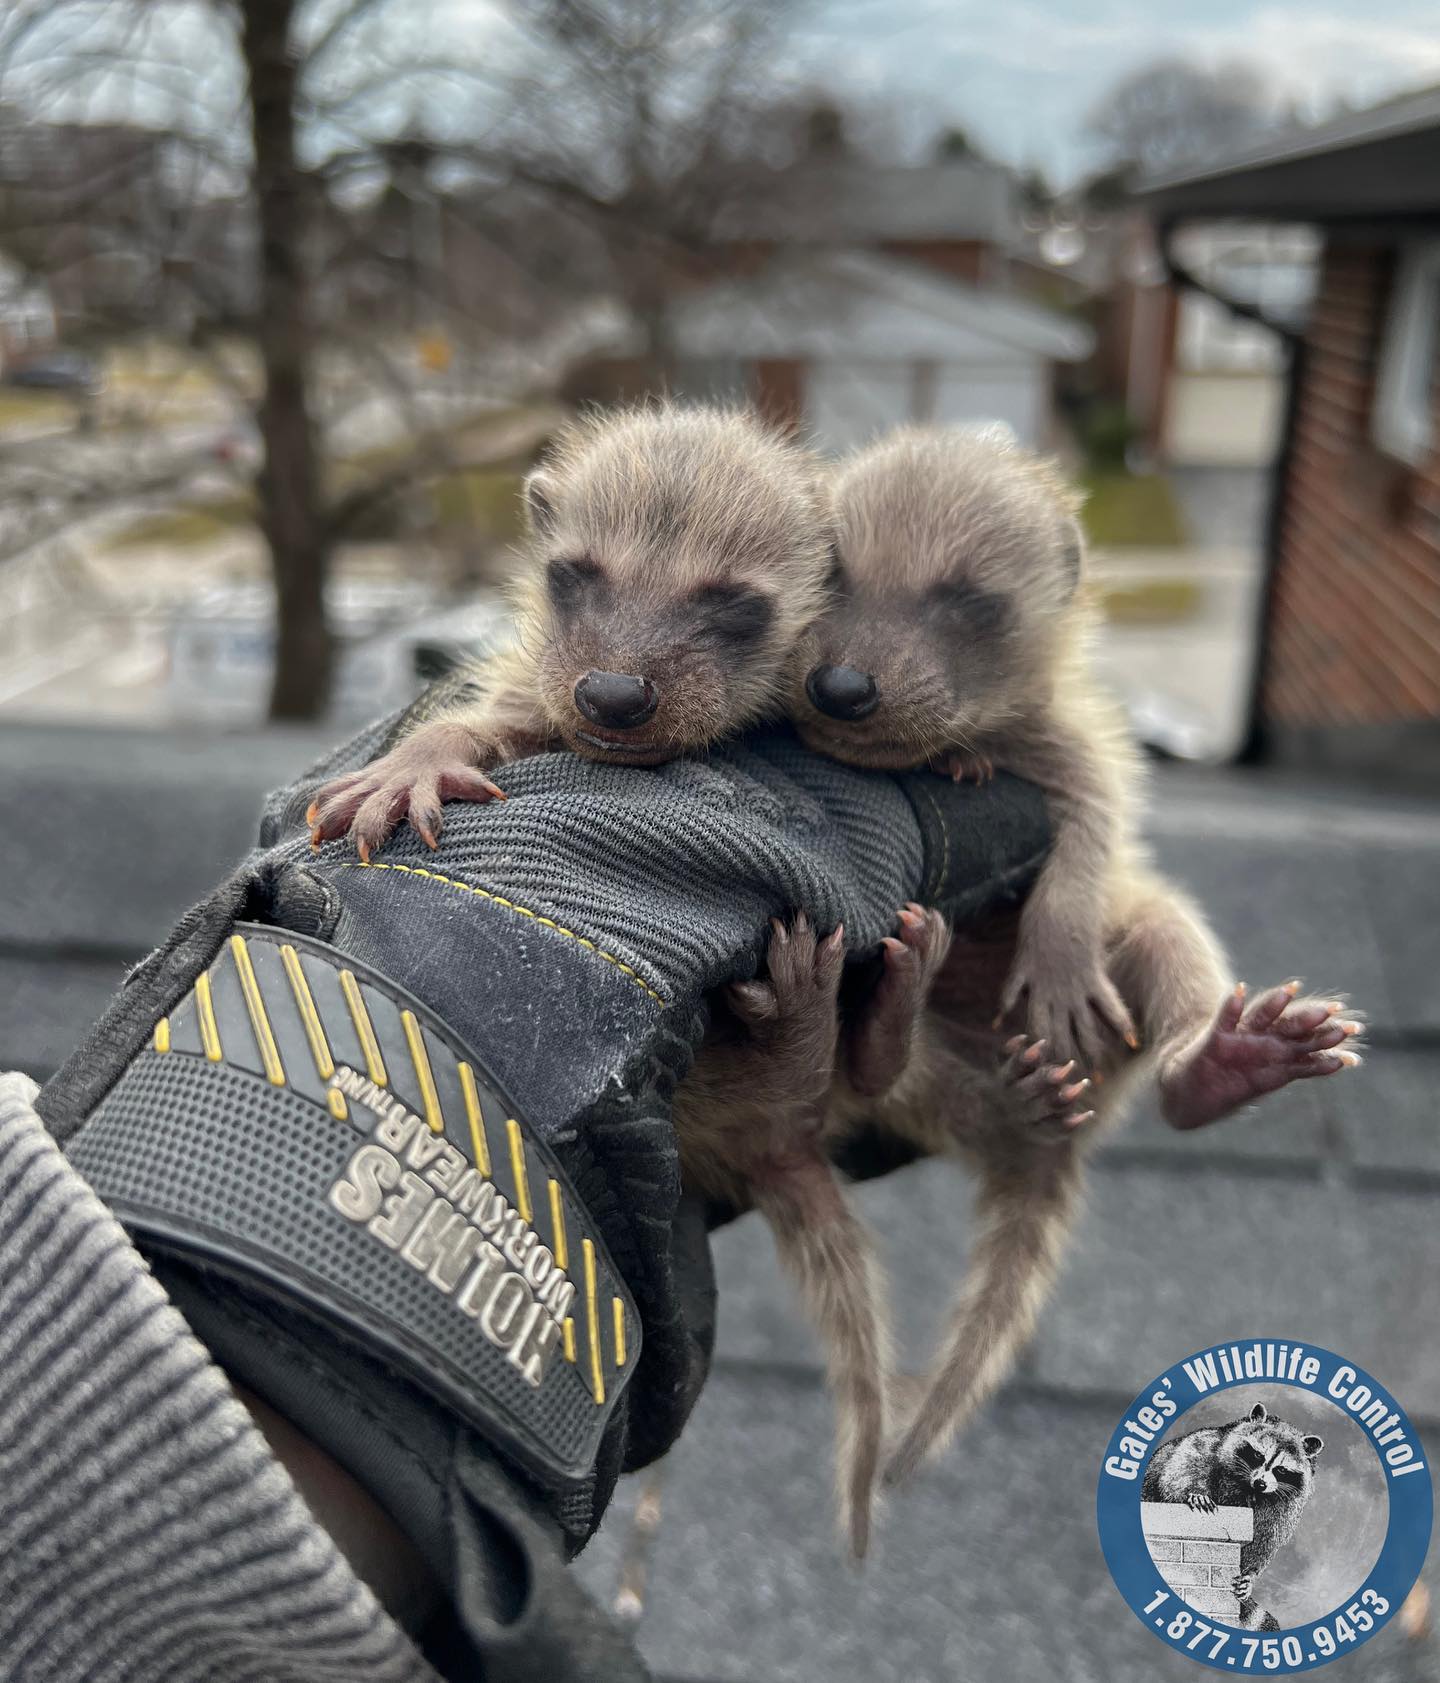 two baby raccoons on the glove